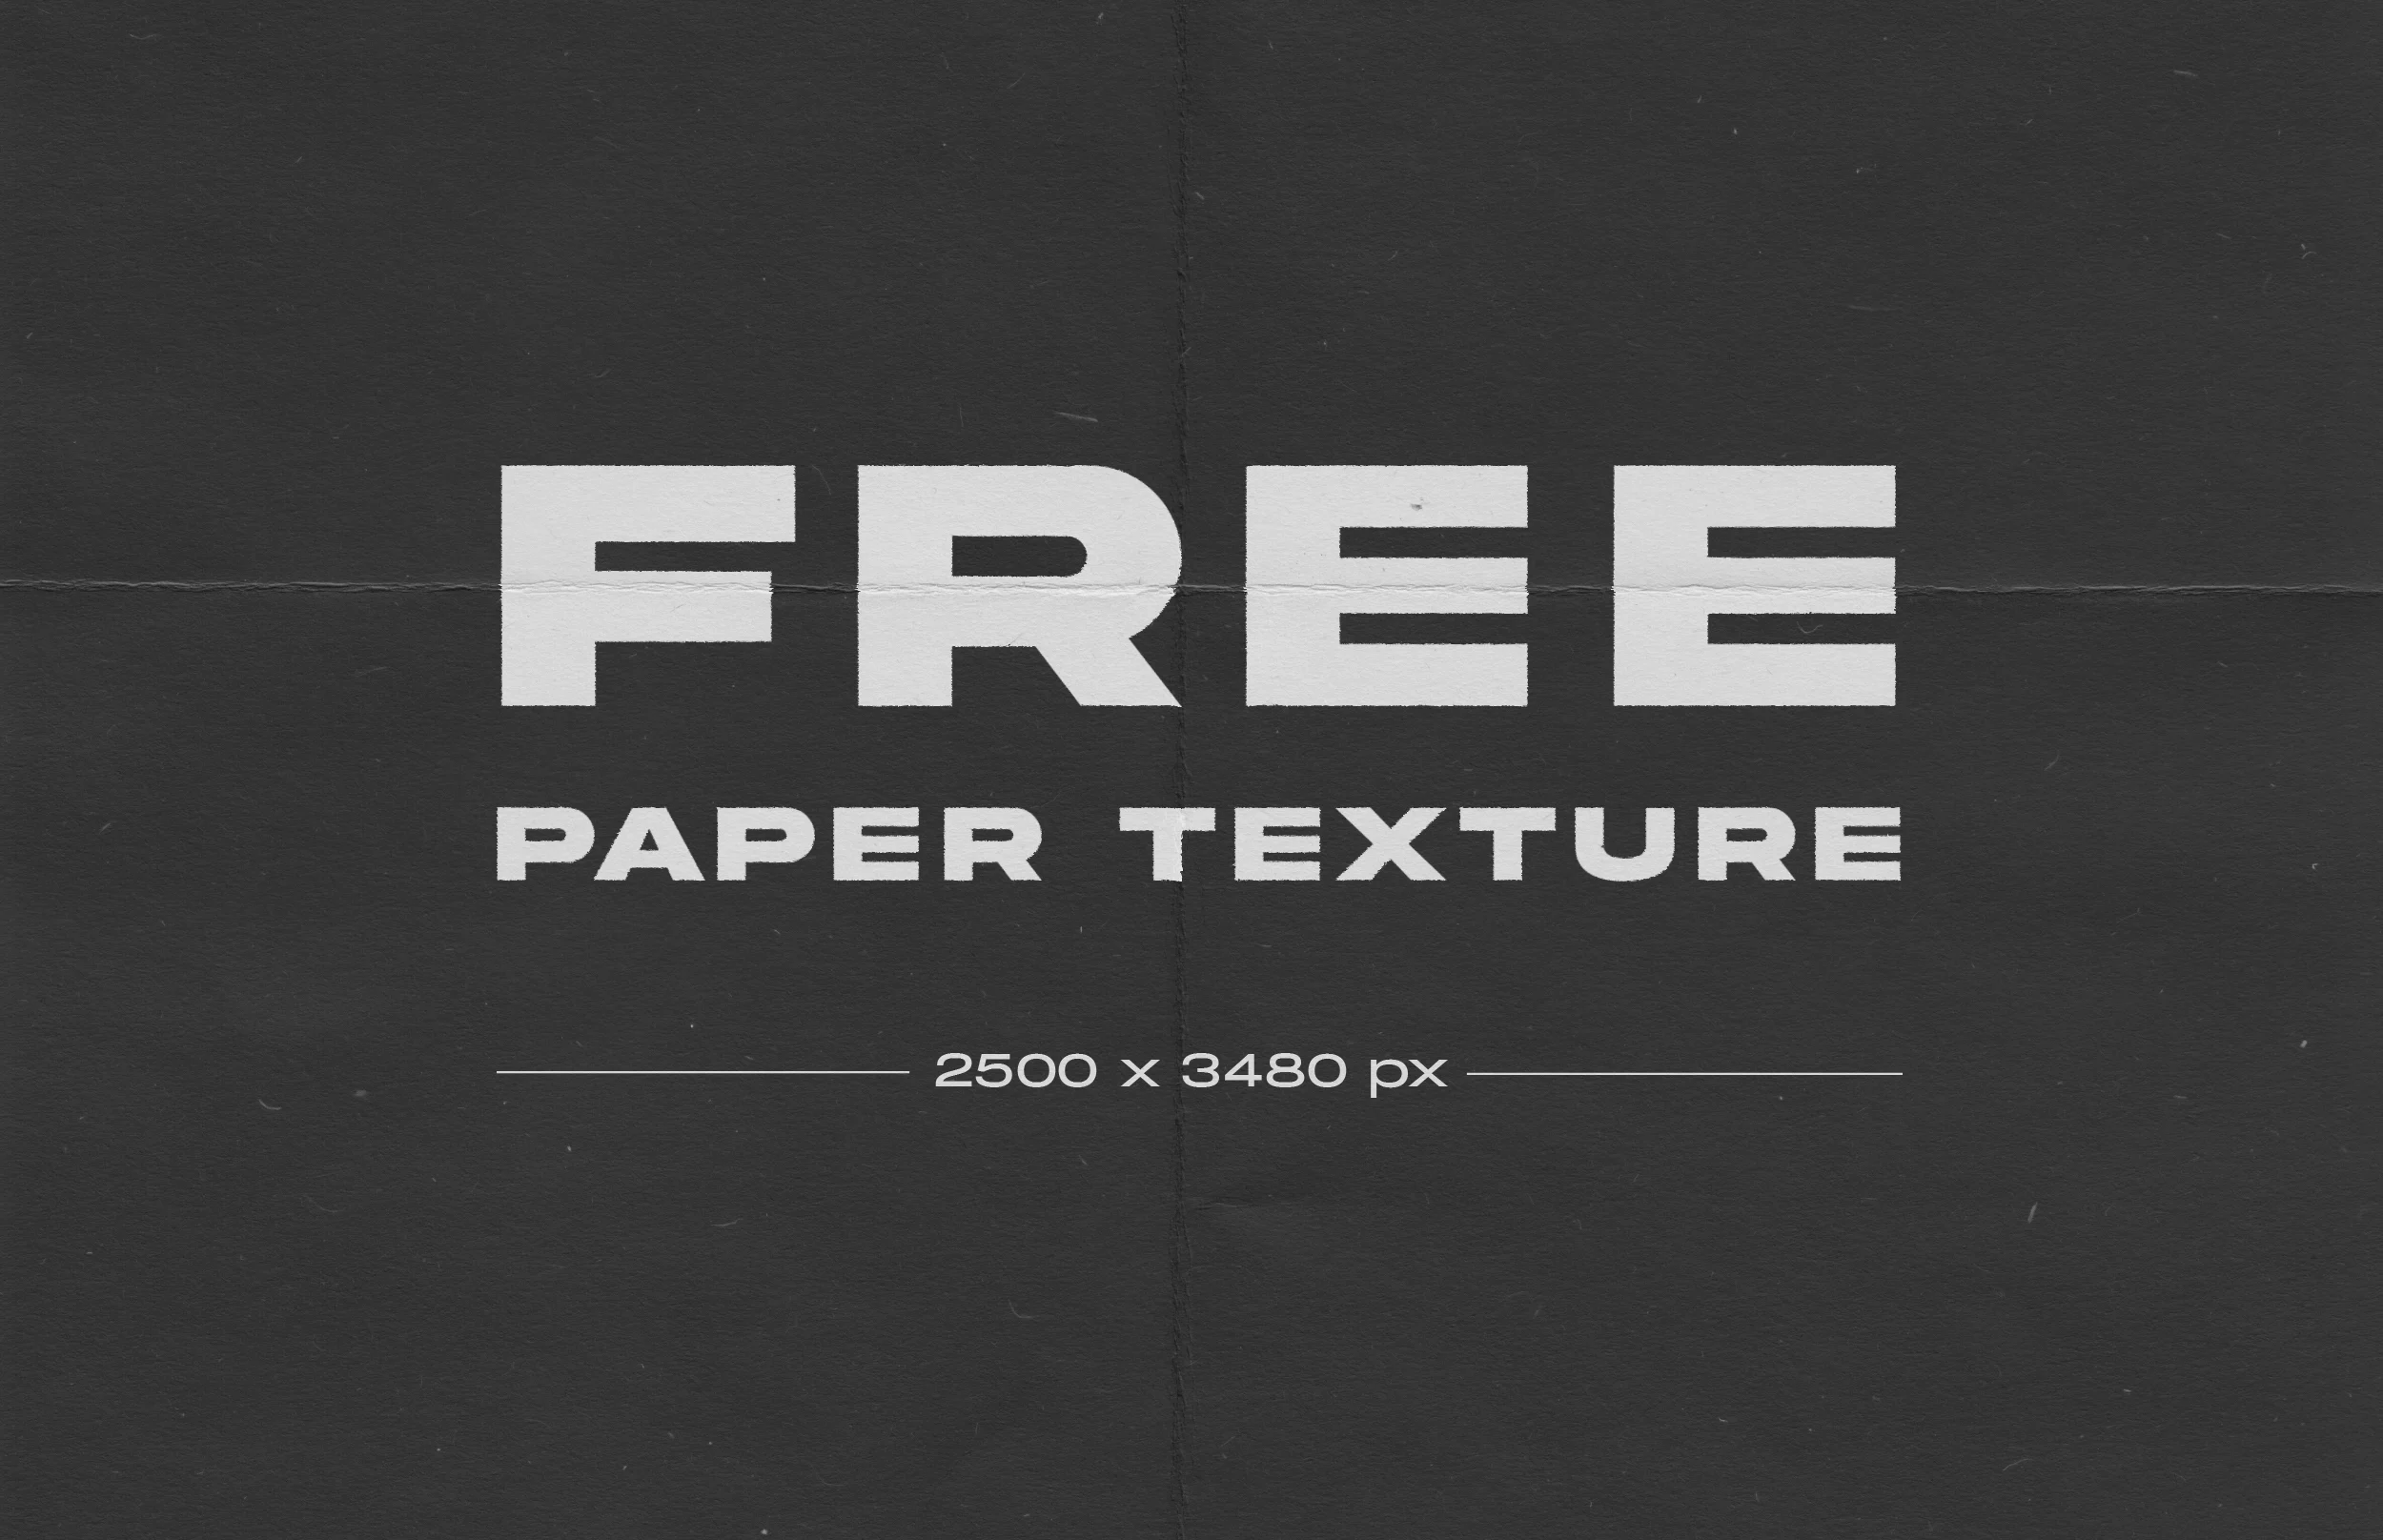 Antique Paper Texture Background Stock Photo - Download Image Now